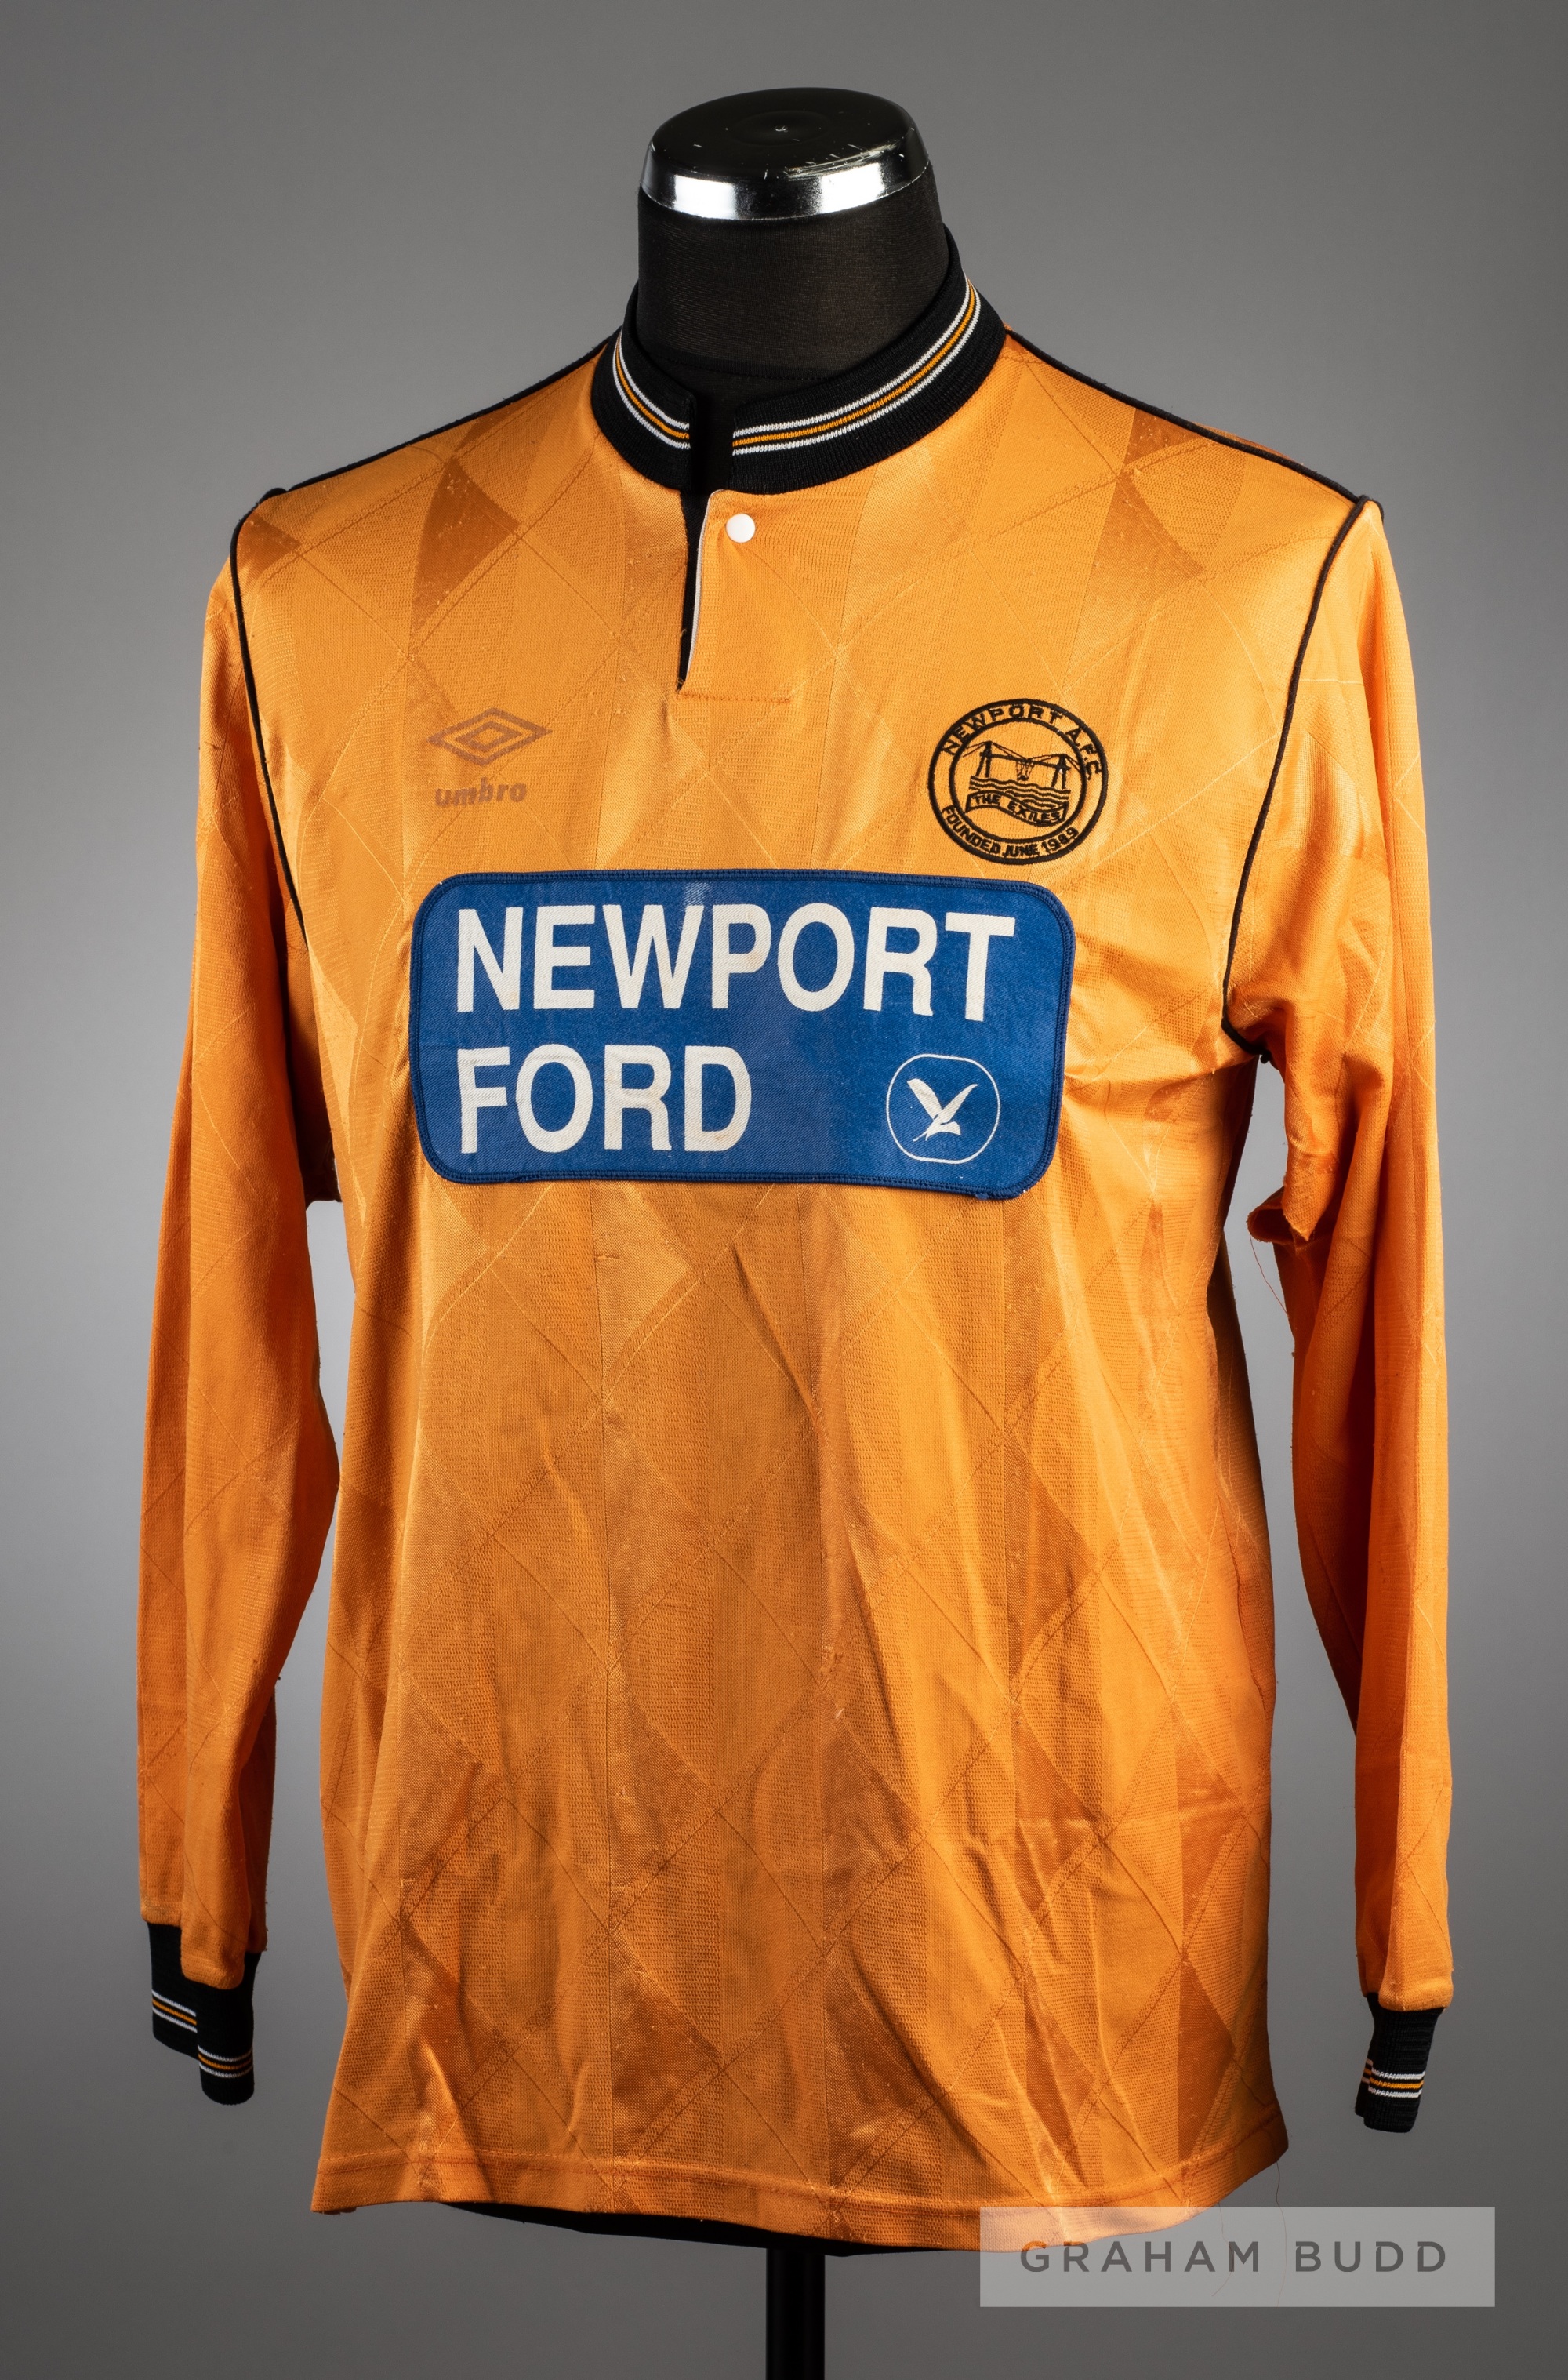 Amber Newport County AFC No.14 substitute's jersey from the club's reformation season in 1989-90, by